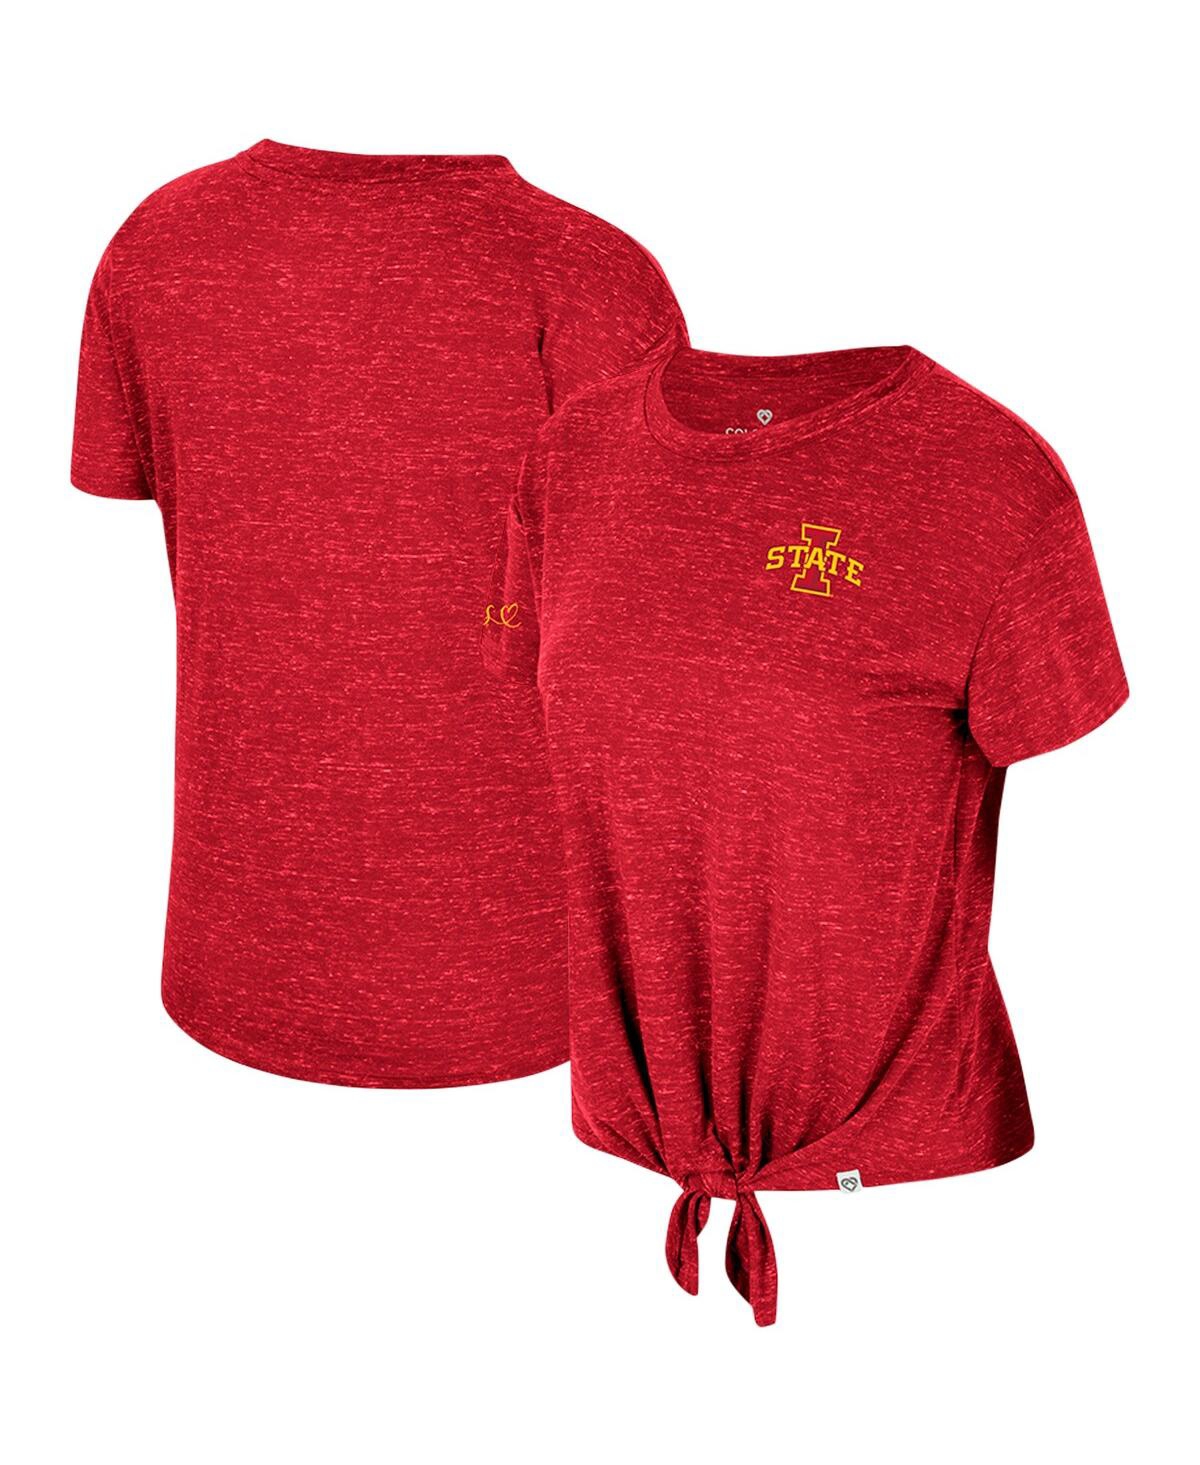 Women's Colosseum Cardinal Distressed Iowa State Cyclones Finalists Tie-Front T-shirt - Cardinal